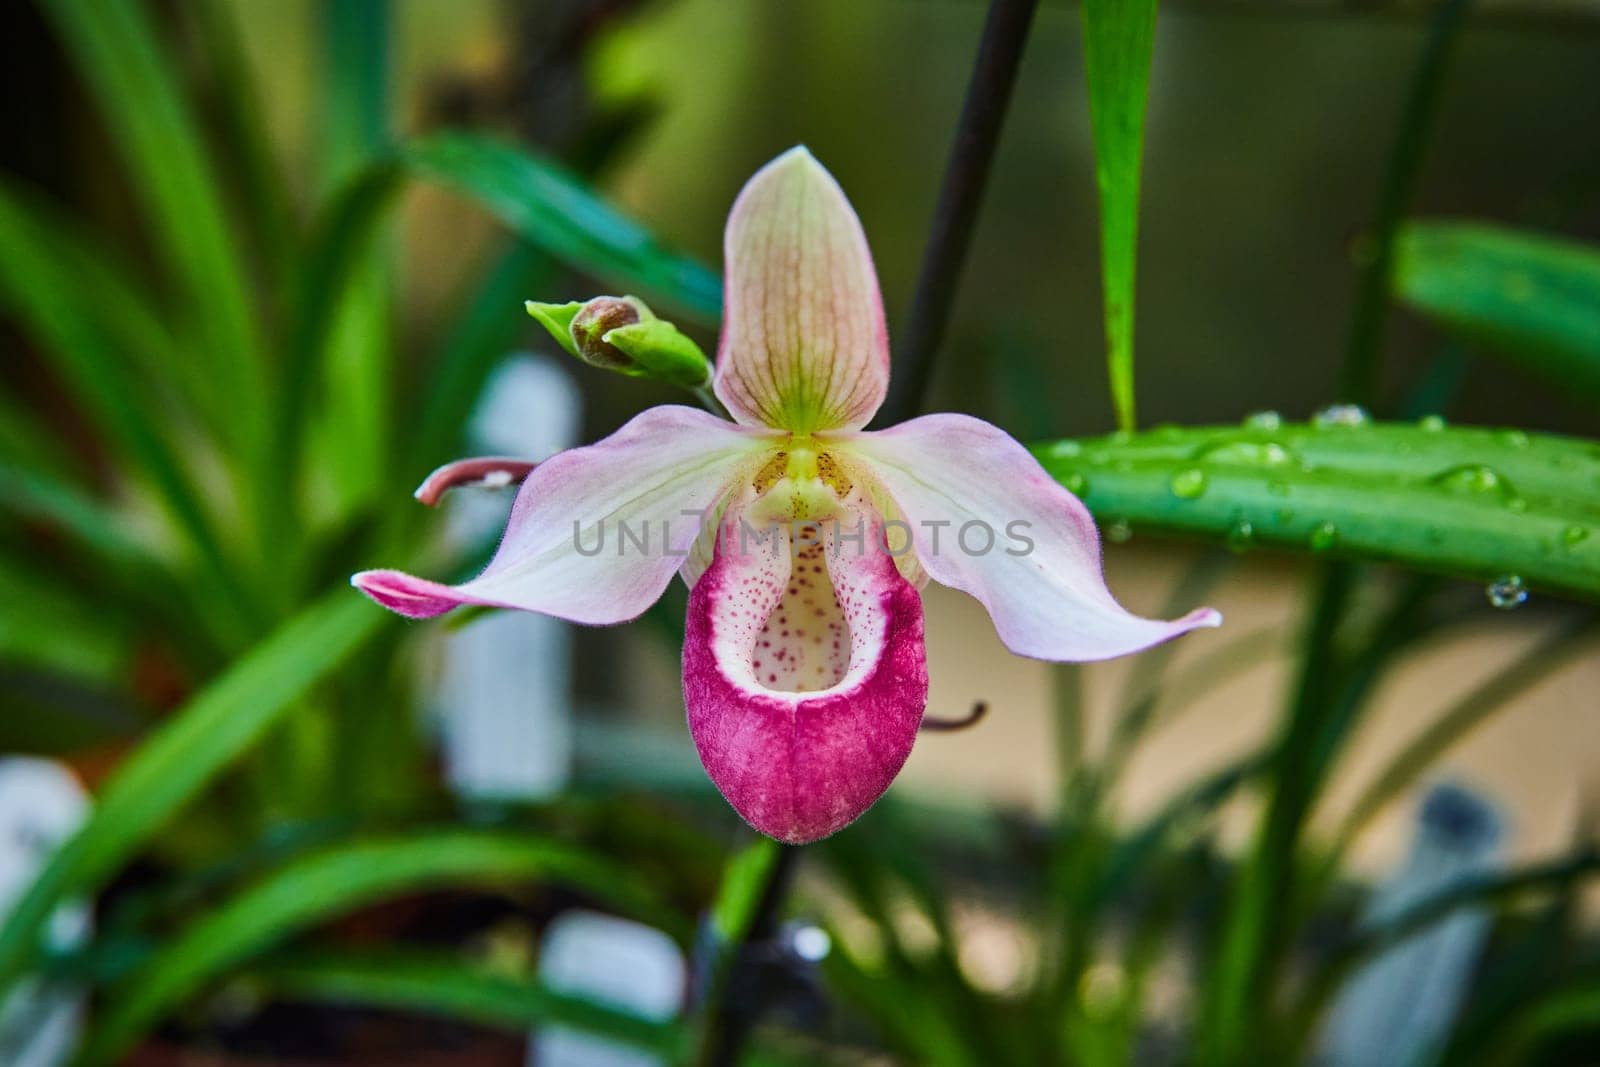 Elegant Paphiopedilum Orchid with Water Droplets, Close-Up View by njproductions